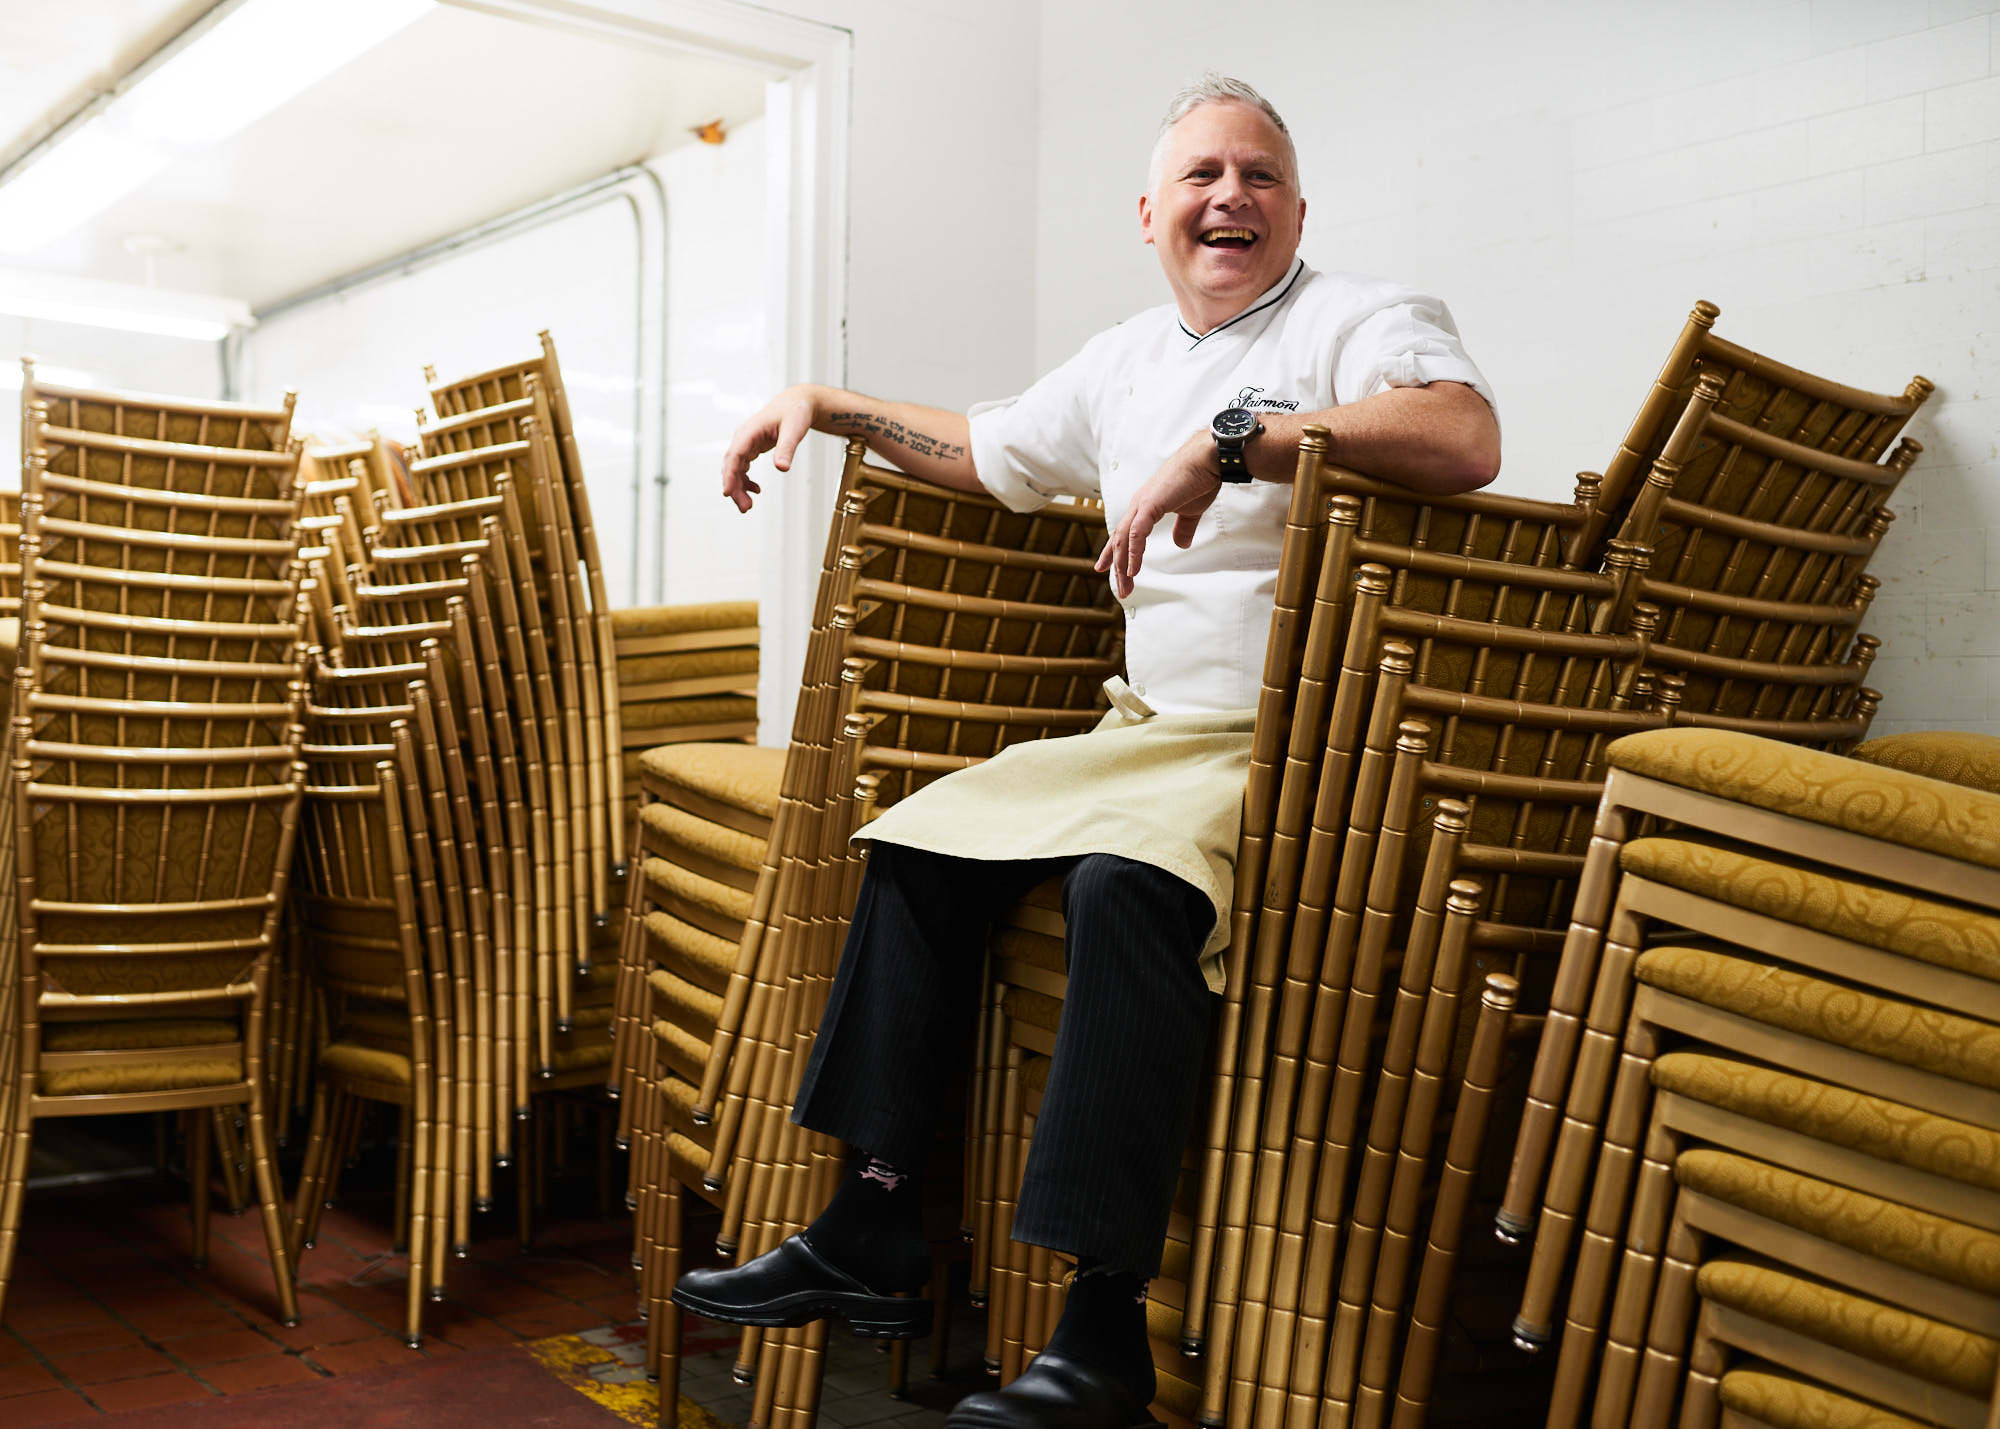 royal-york-hotel-chef-laughing-on-chairs